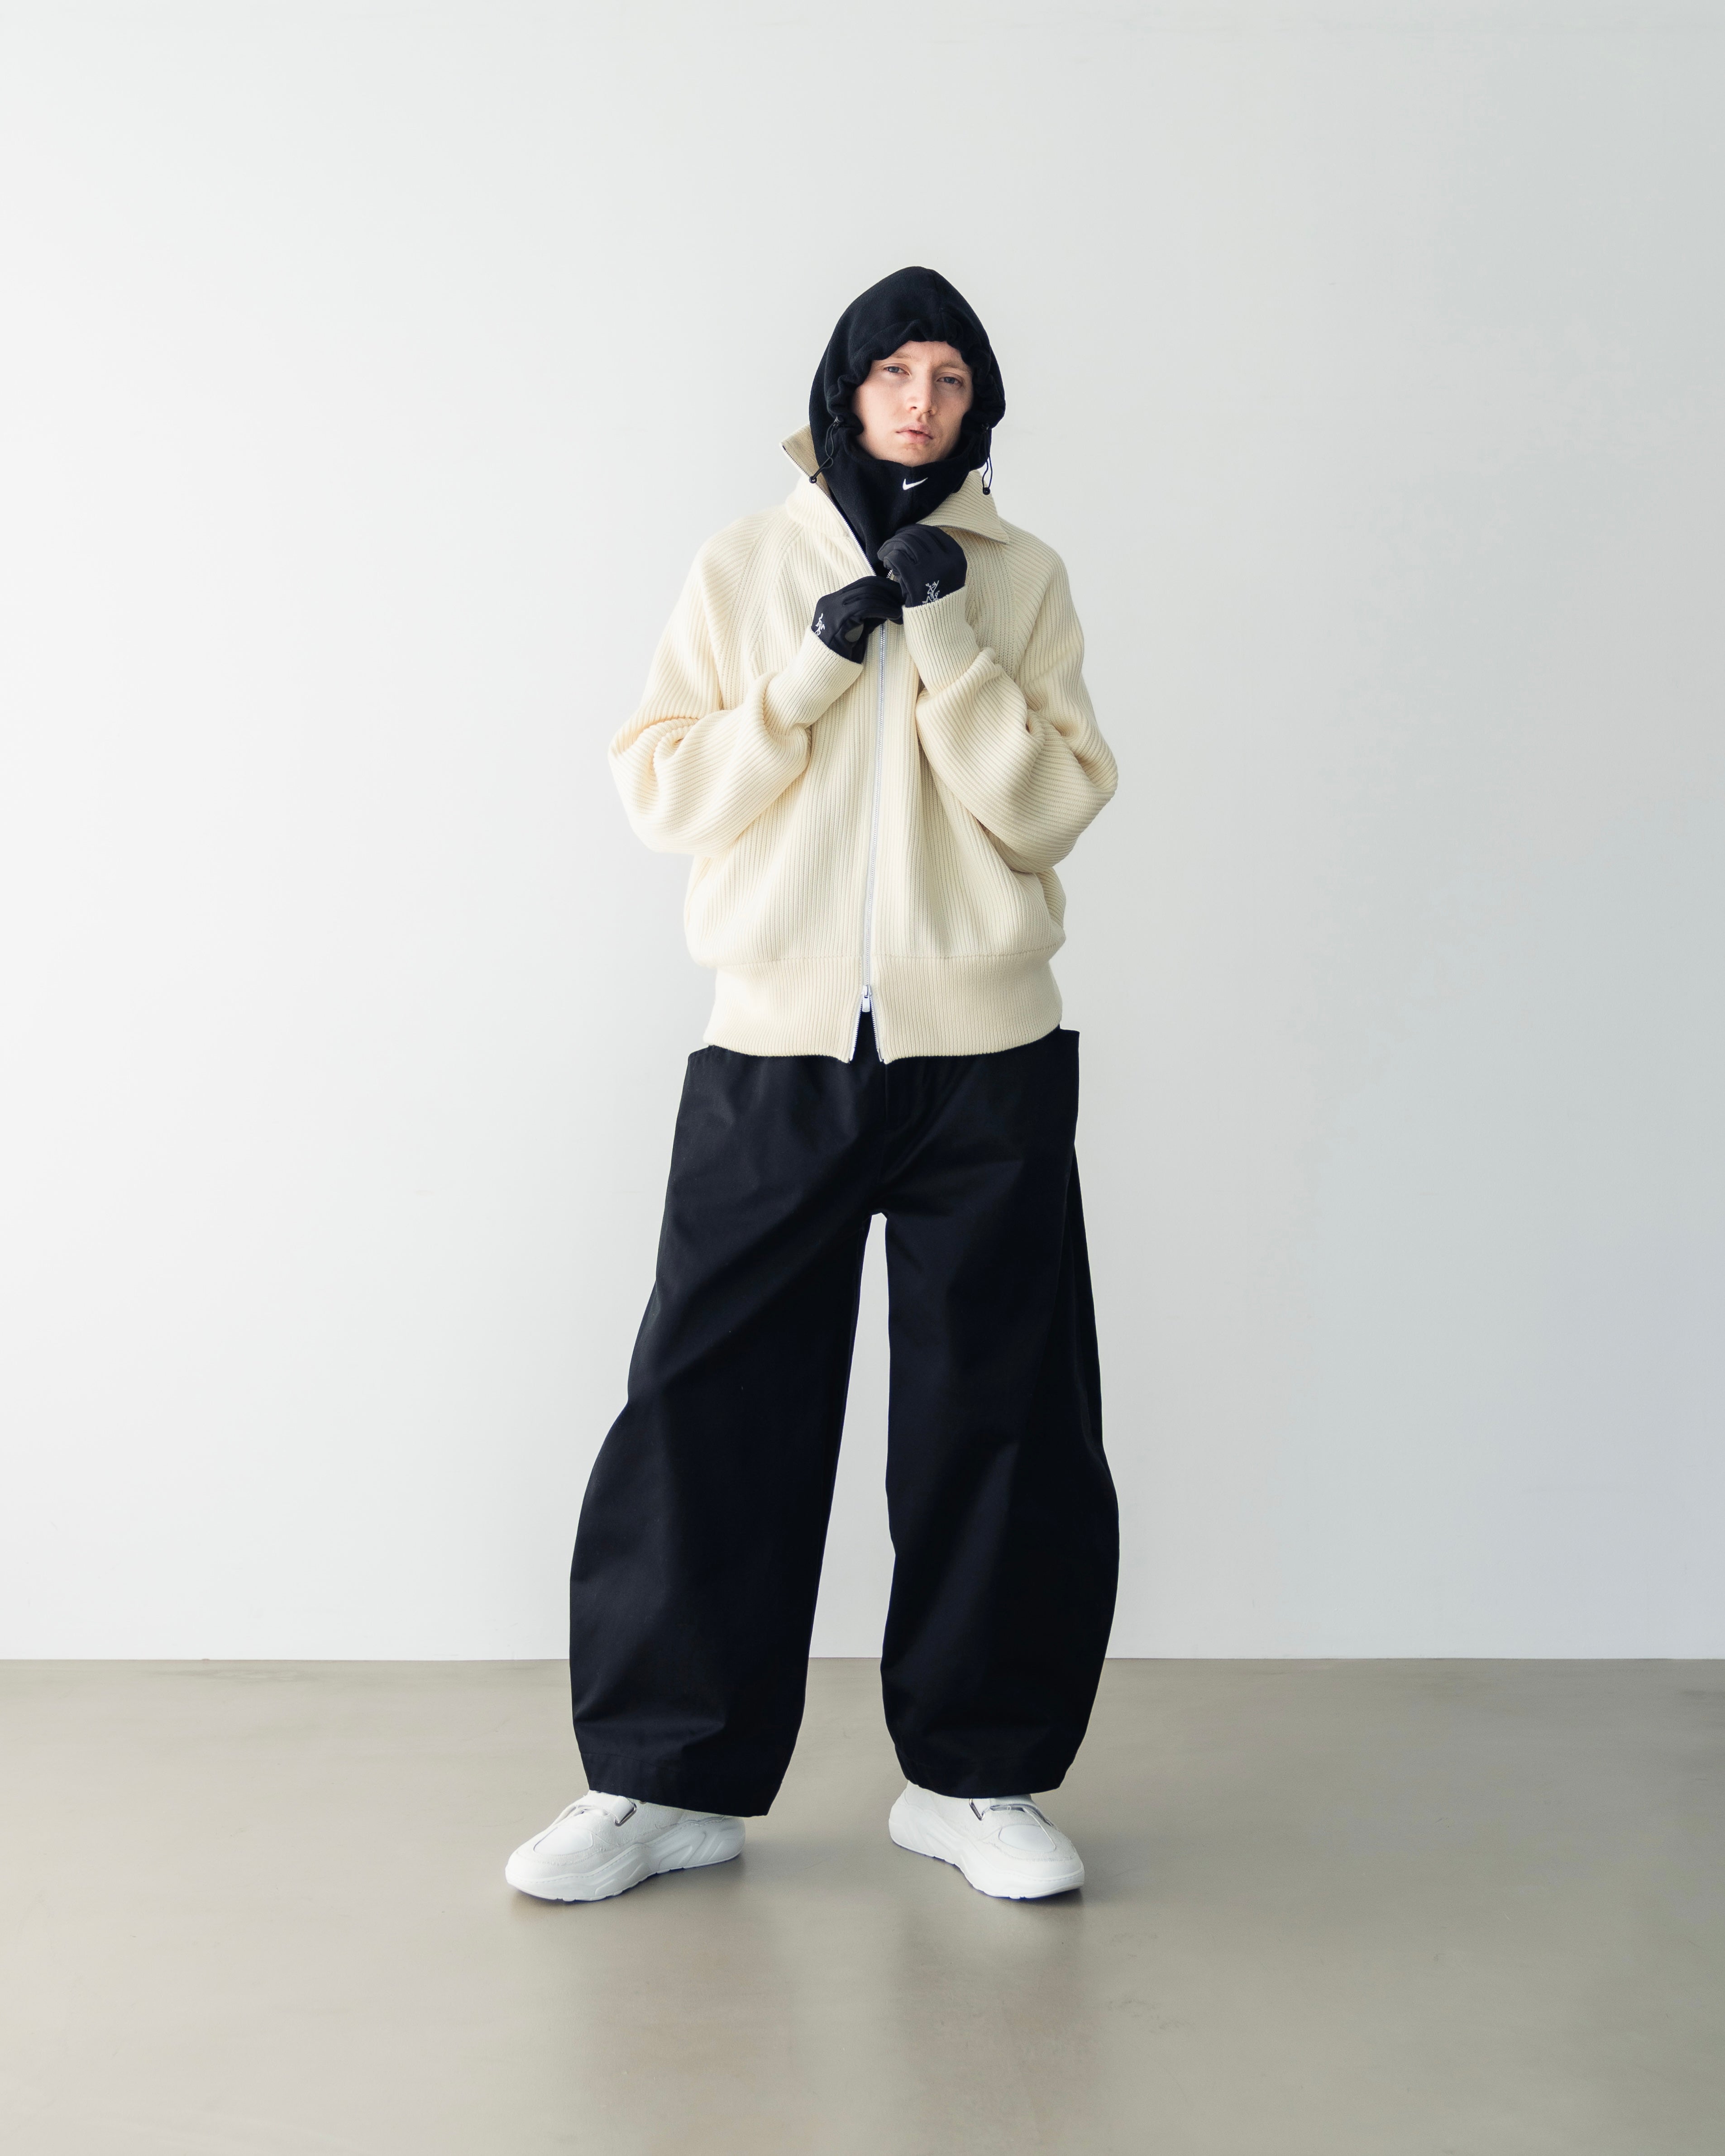 CLESSTE OVERSIZED HIGH NECK DRIVERS KNIT